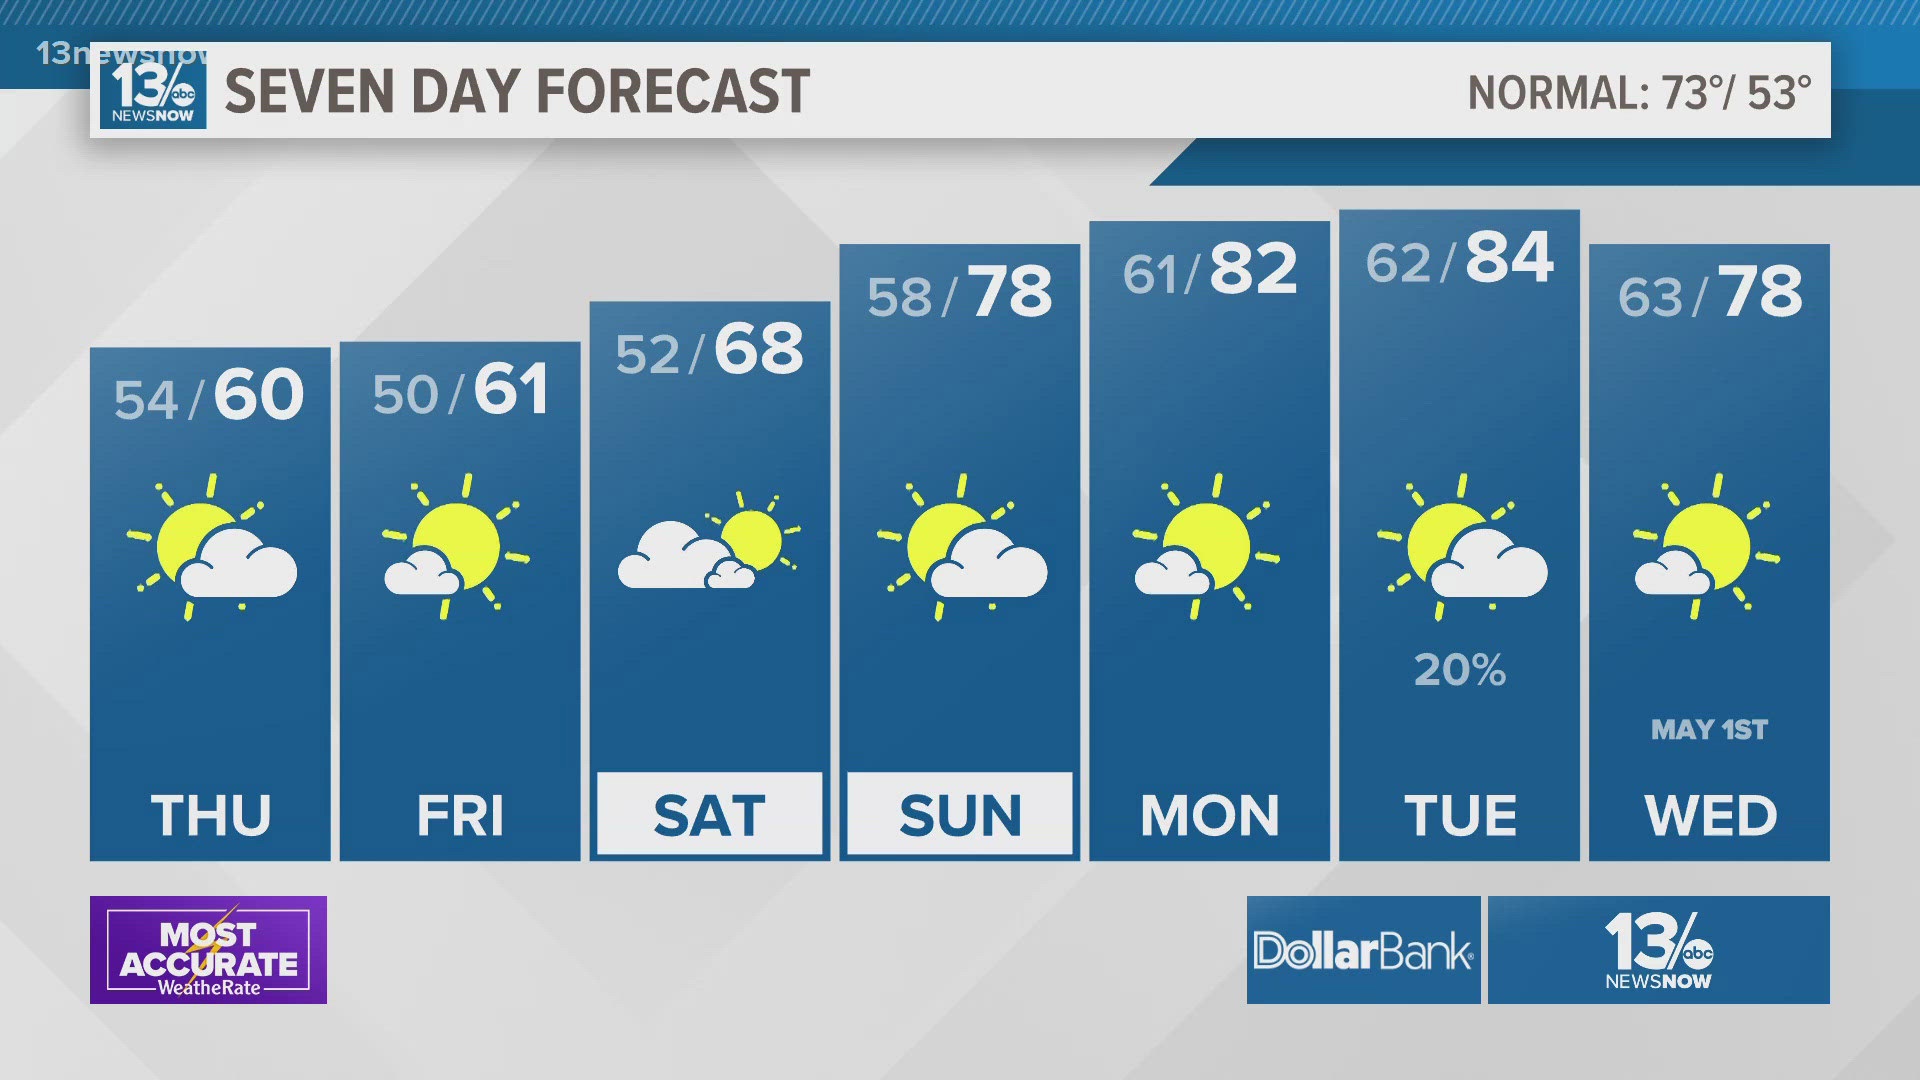 After a couple of cooler afternoons on Thursday and Friday, warmer days are on the horizon.